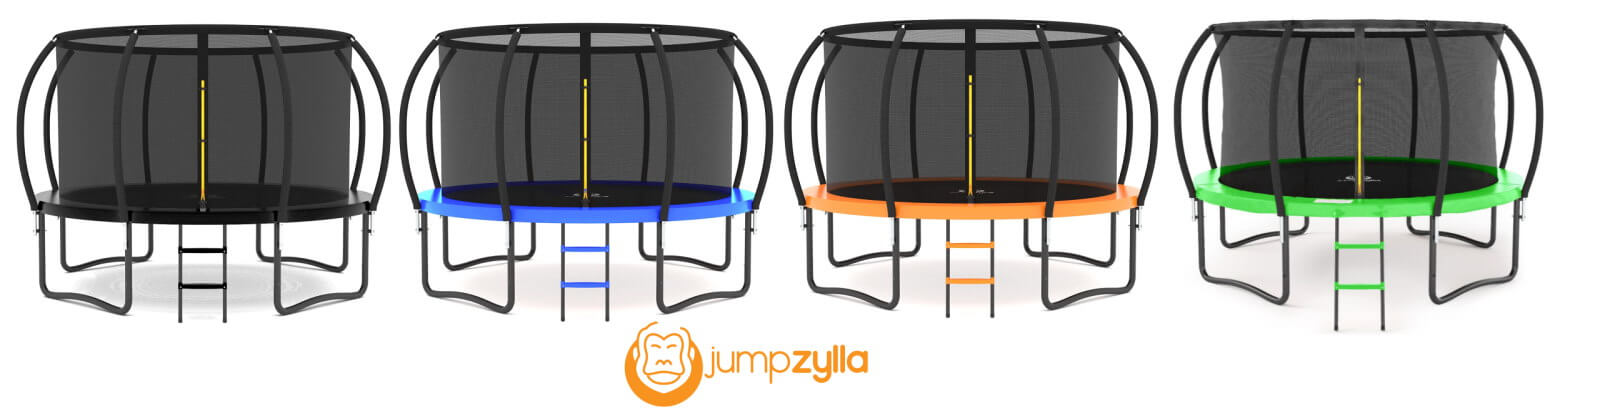 Jumpzylla trampoline different colors